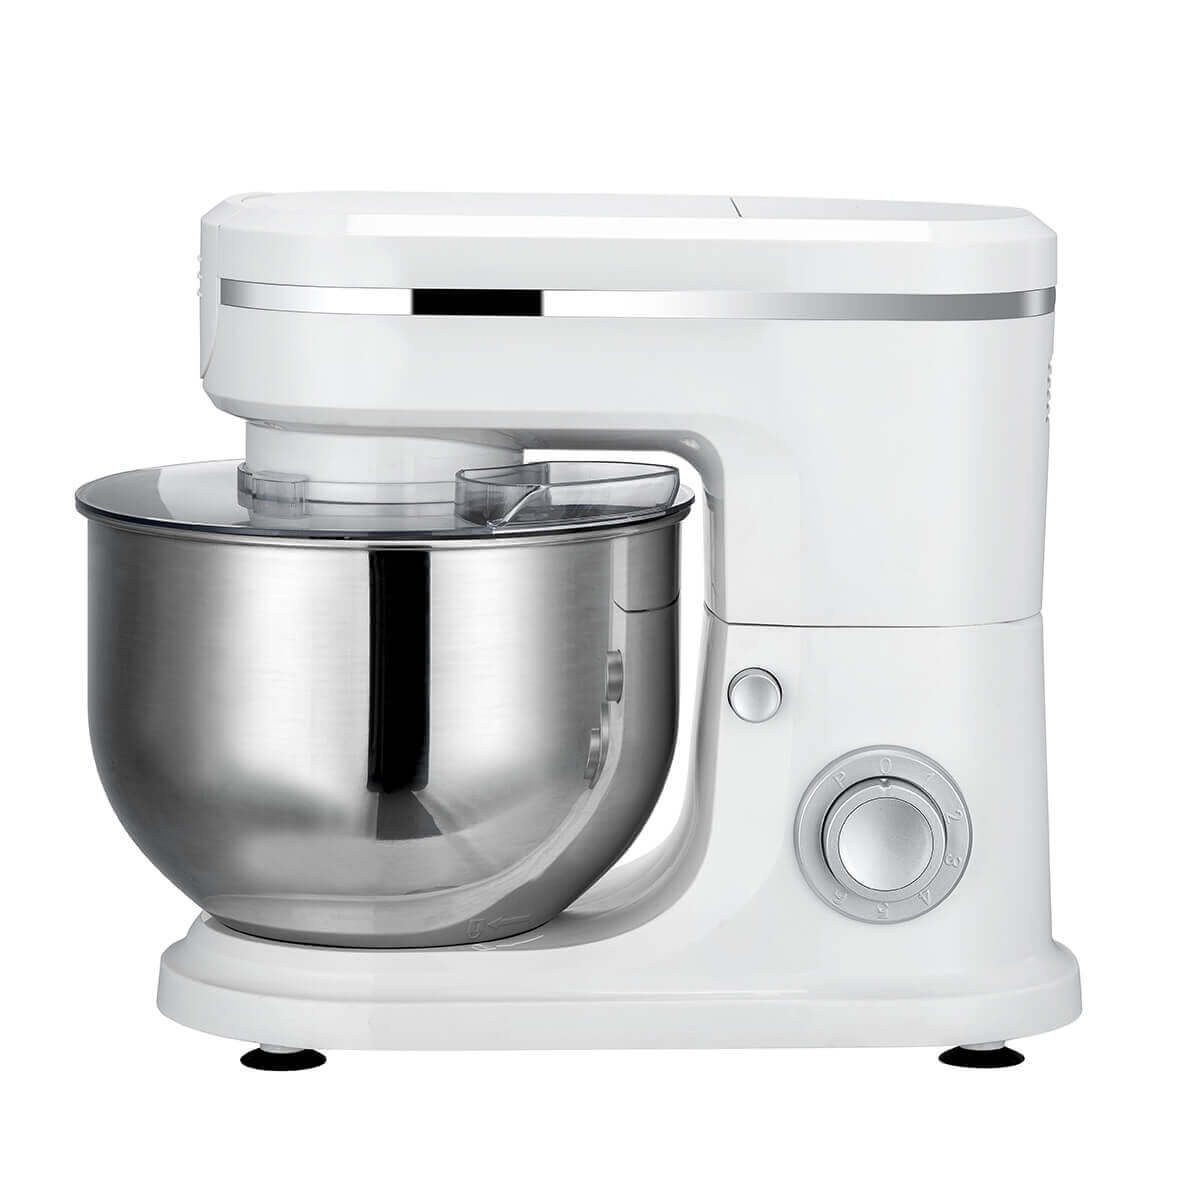 Best 3 IN 1 Electric Stand Mixer Buy on Amazon